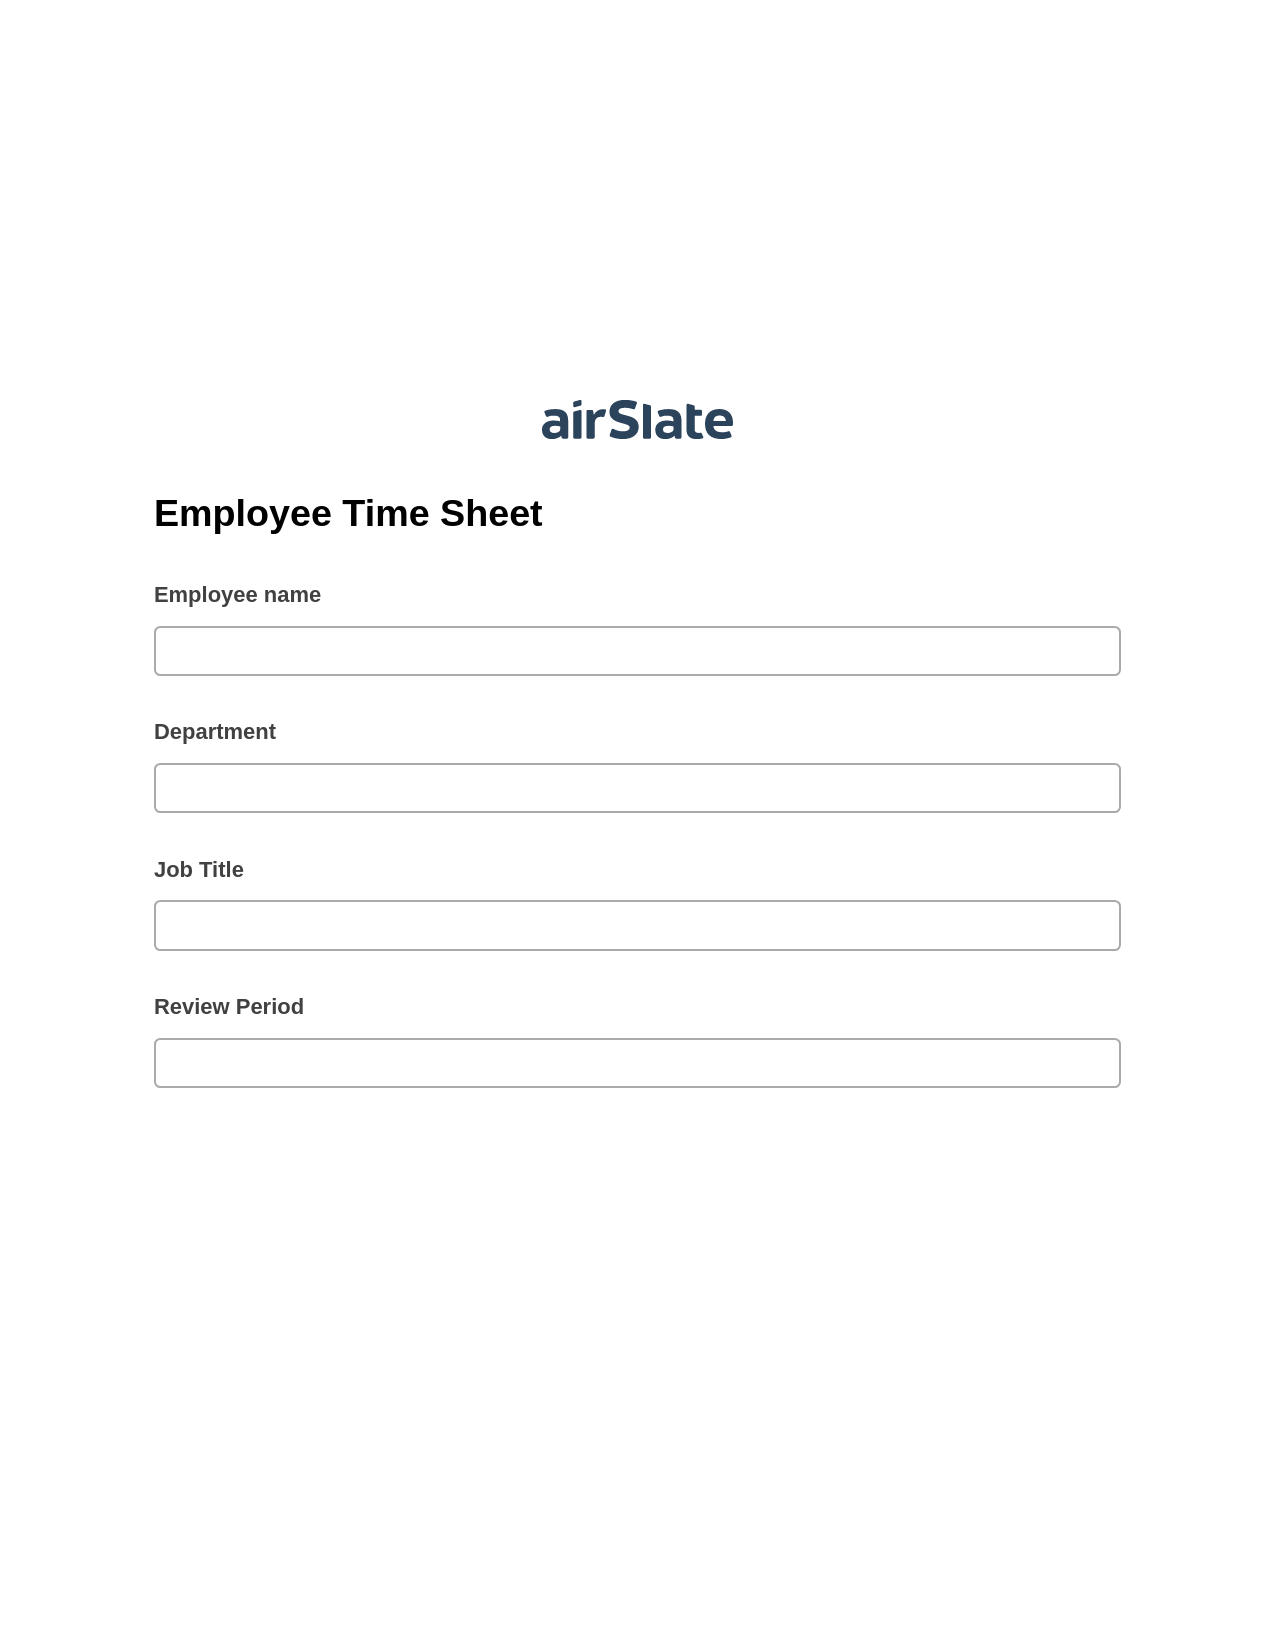 Employee Time Sheet Pre-fill from Excel Spreadsheet Bot, Slack Notification Bot, Archive to Dropbox Bot